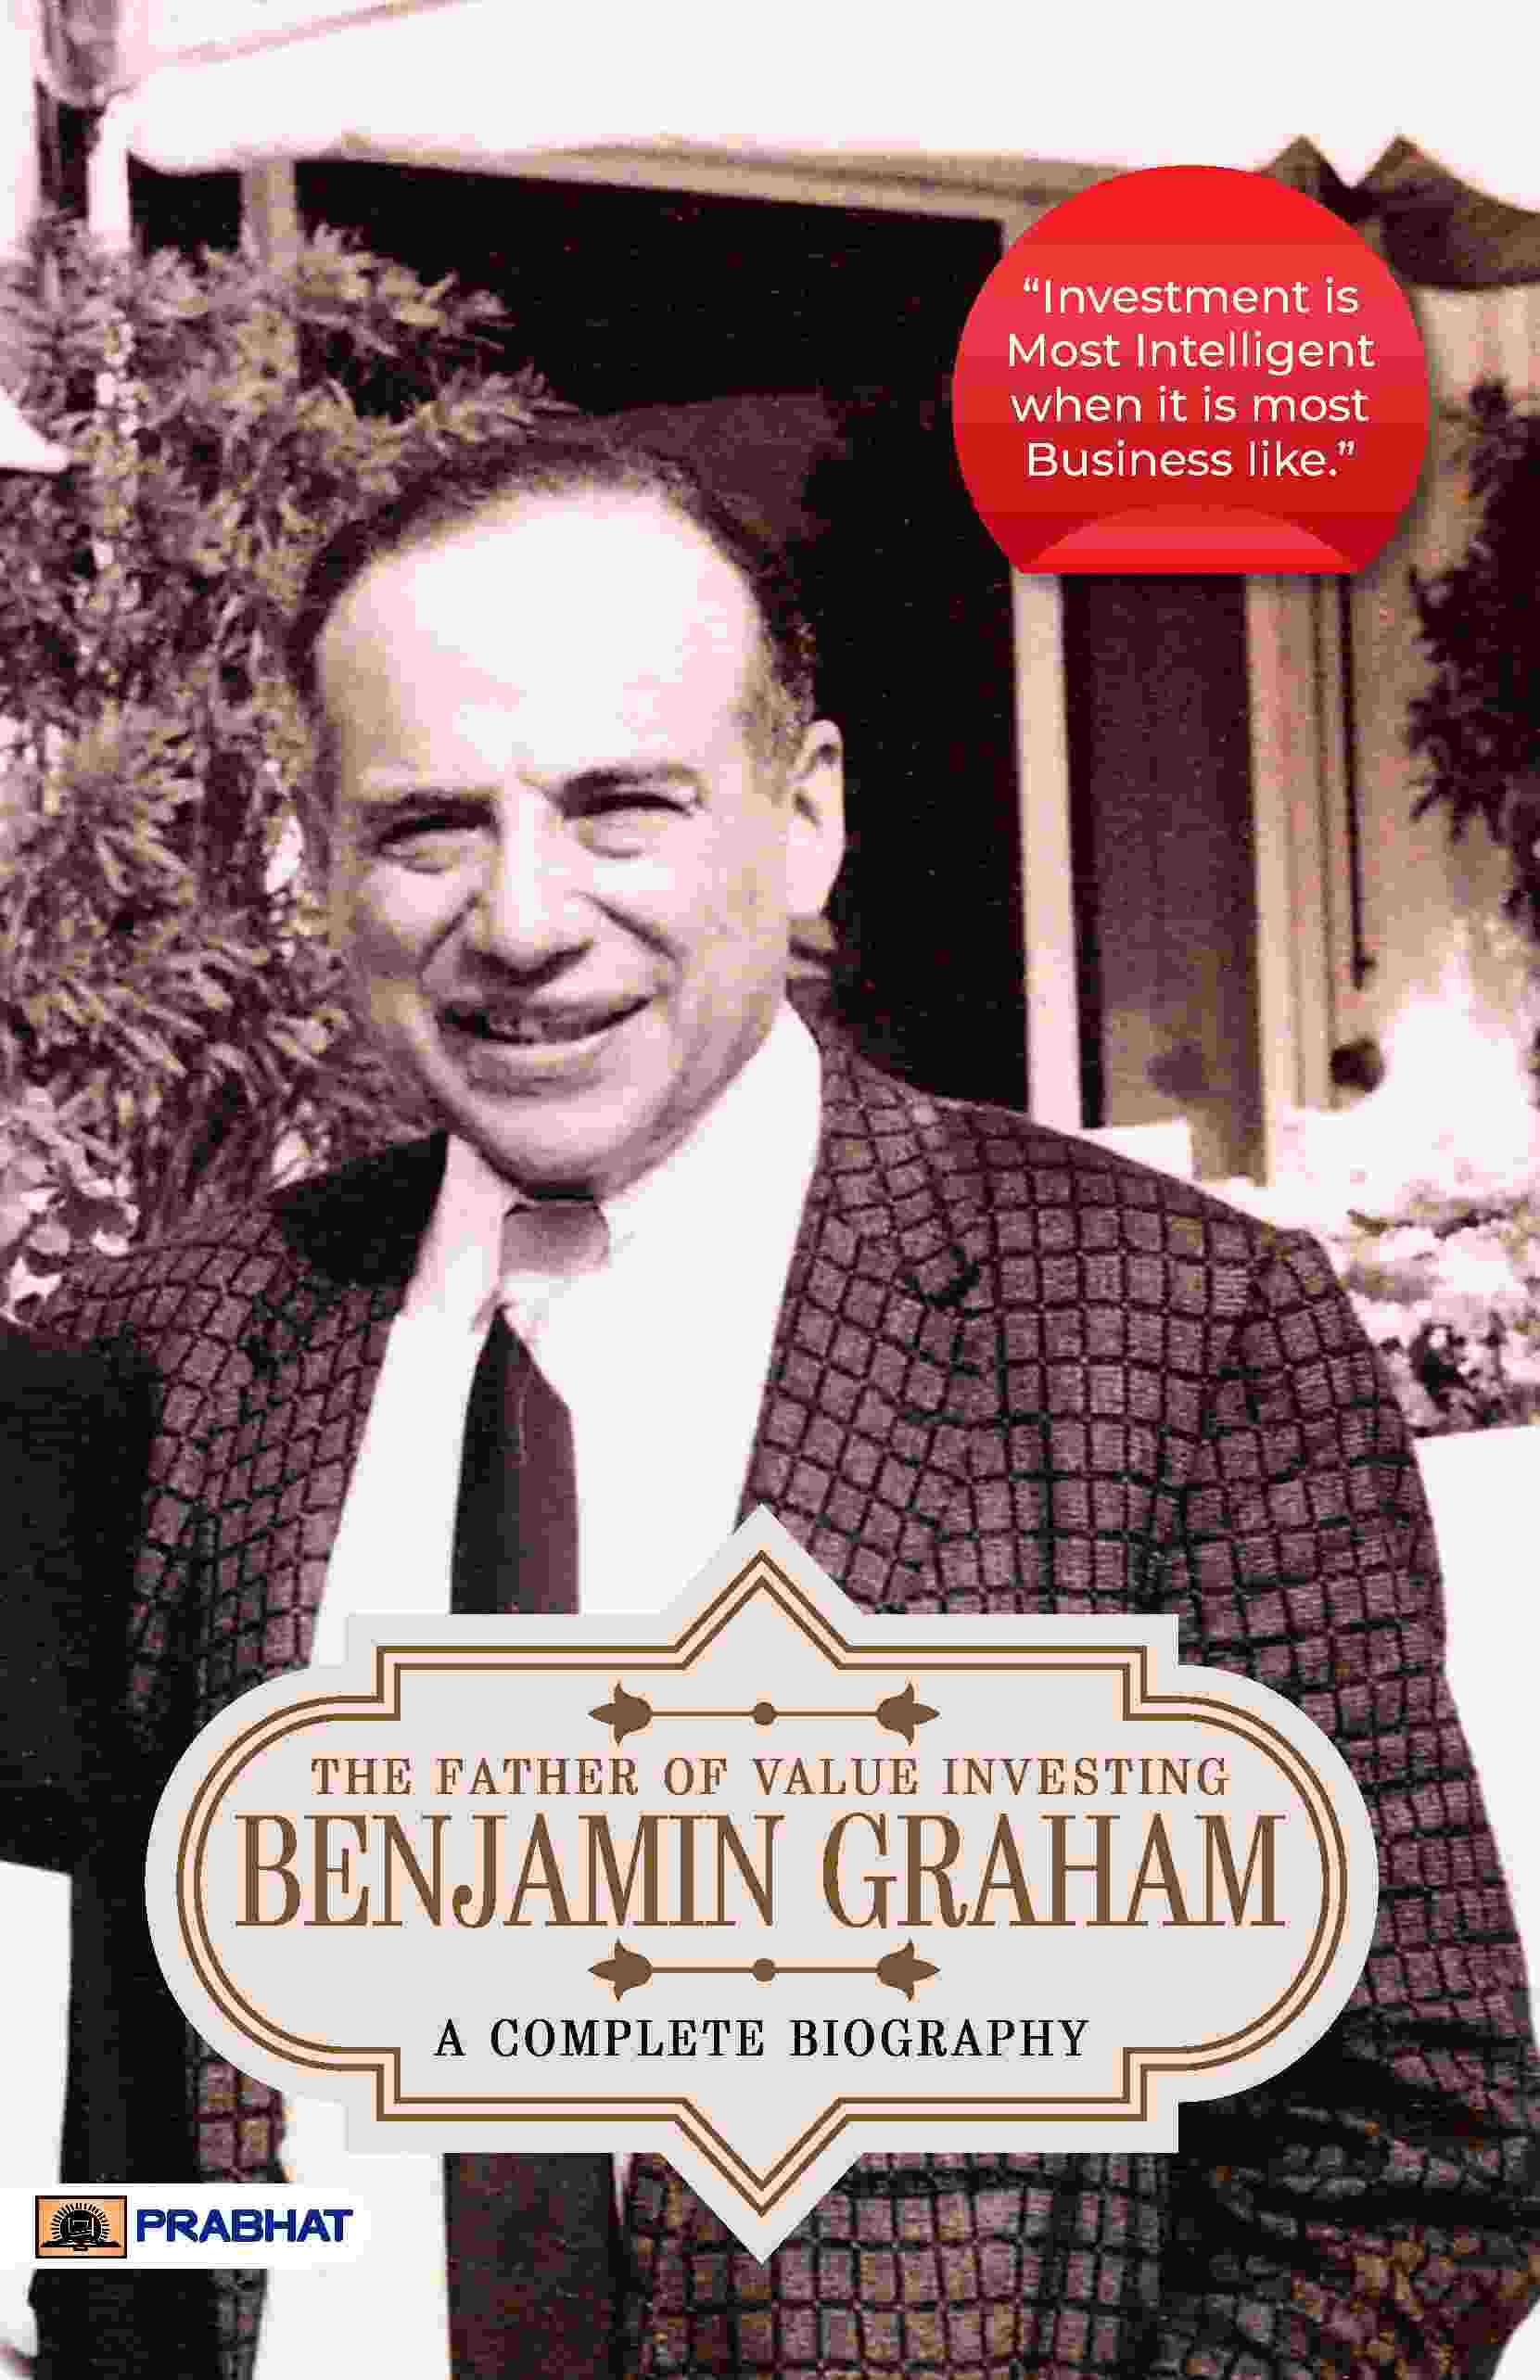 Benjamin Graham: A Complete Biography (The Father of Value Investing)